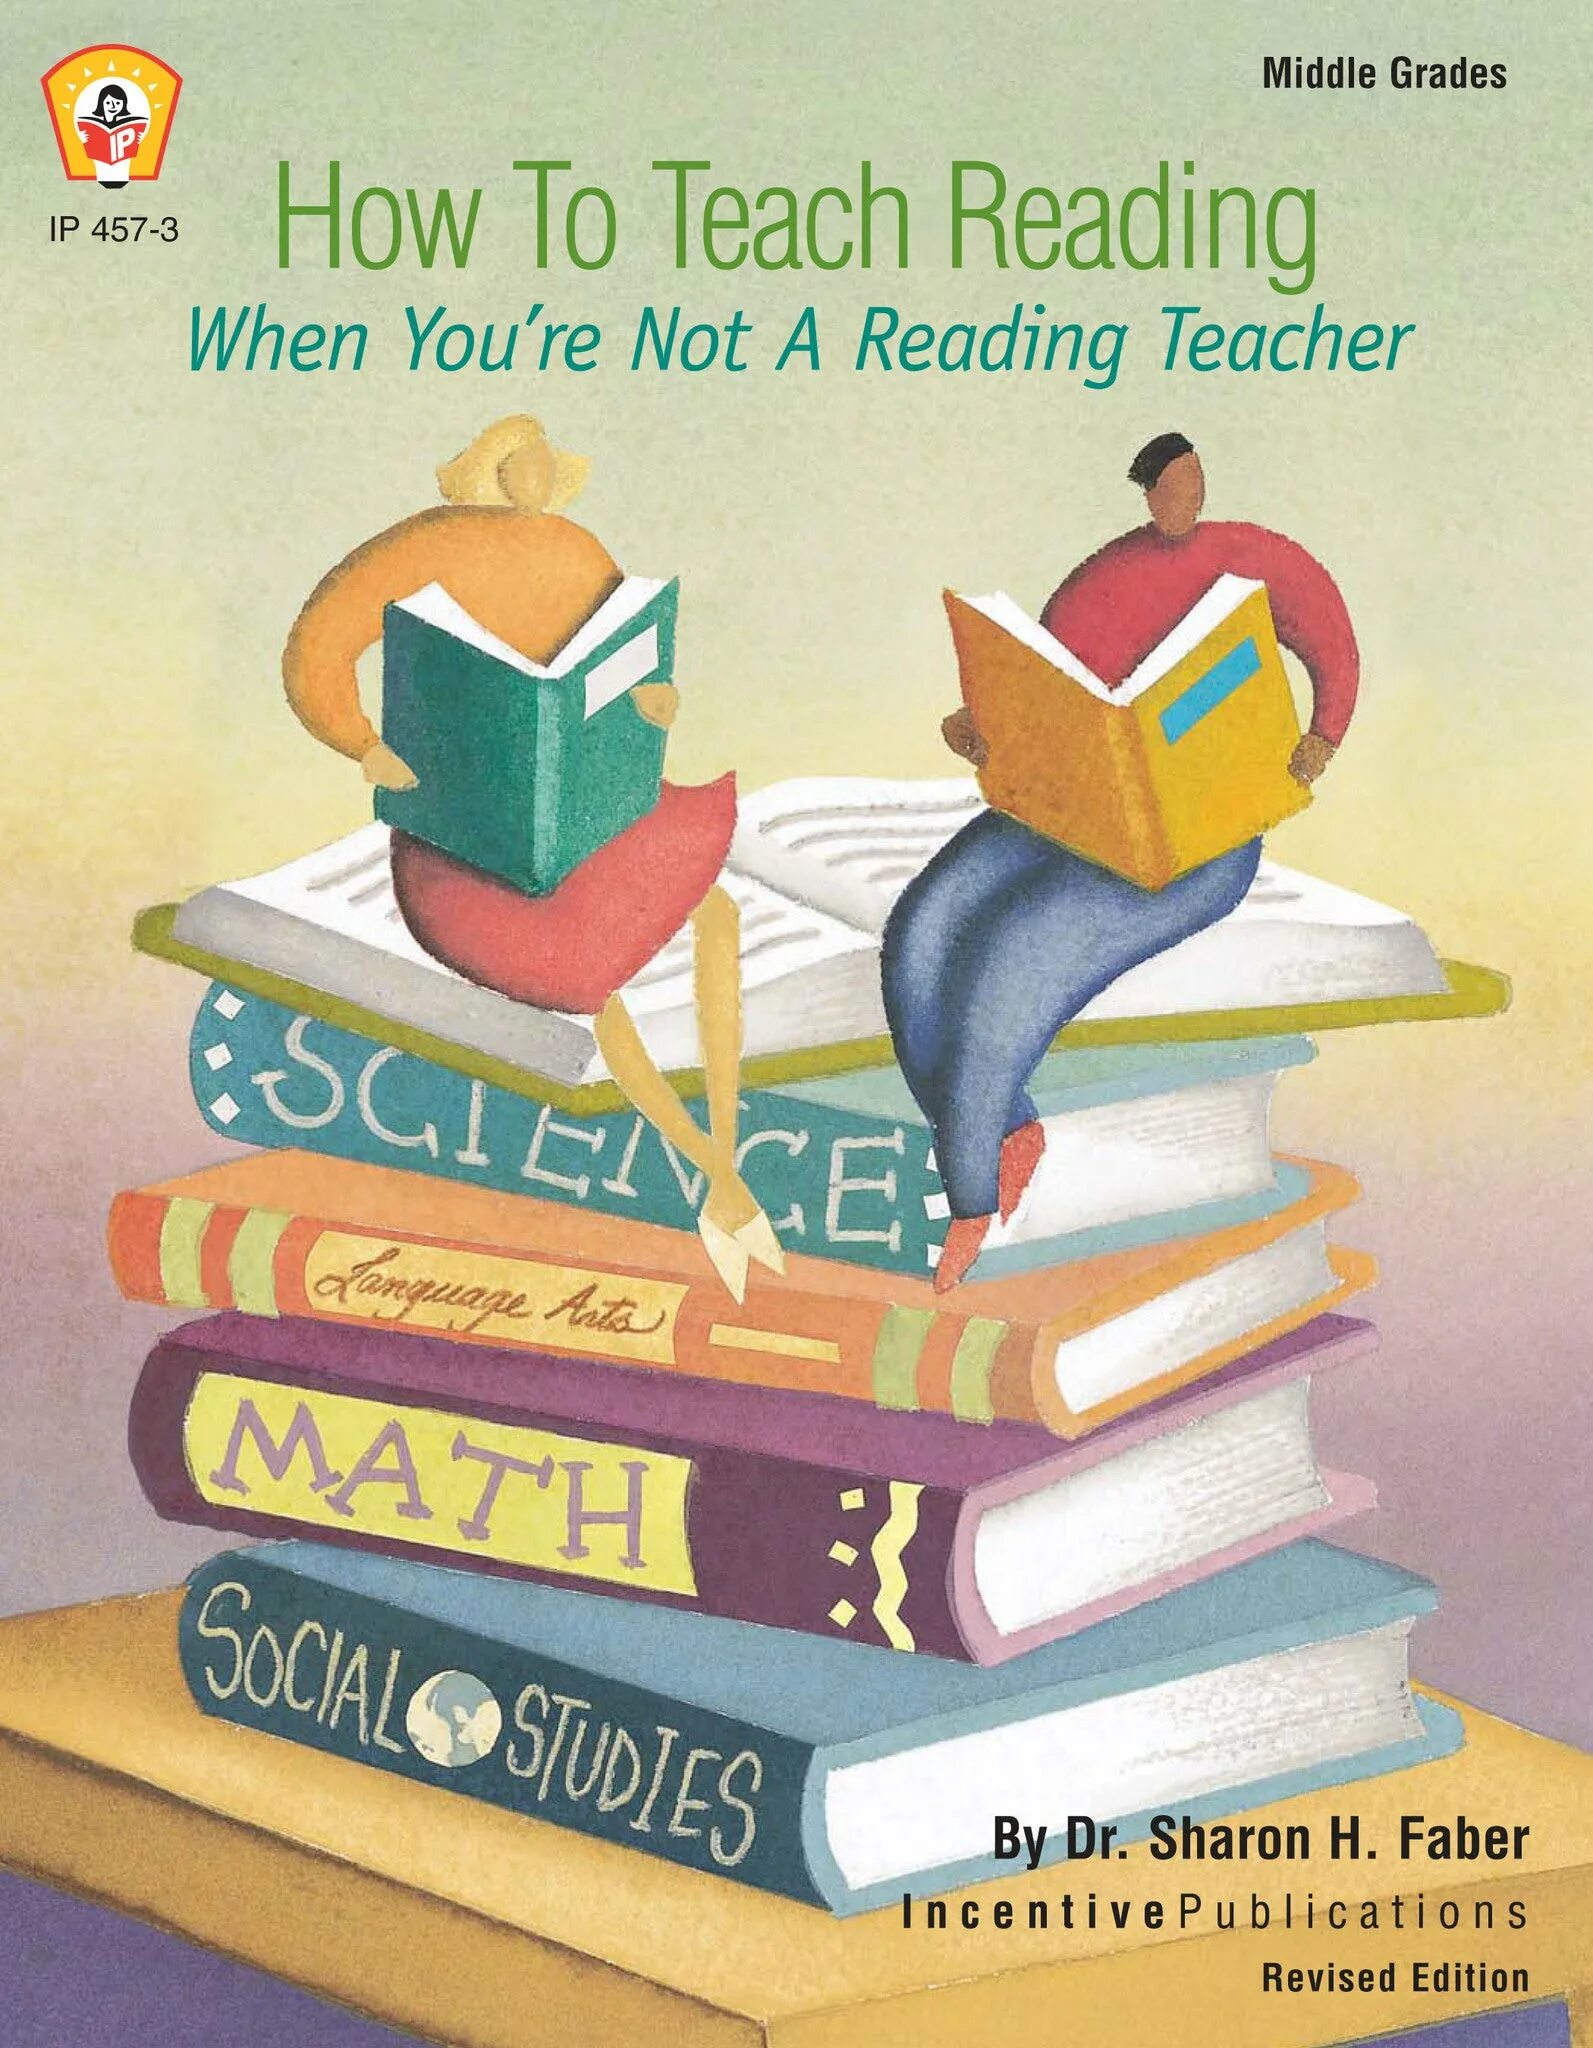 When reading these books the speaker. How to teach reading. Method teaching of reading for Kids. How to teach reading book. How to teach reading effectively..